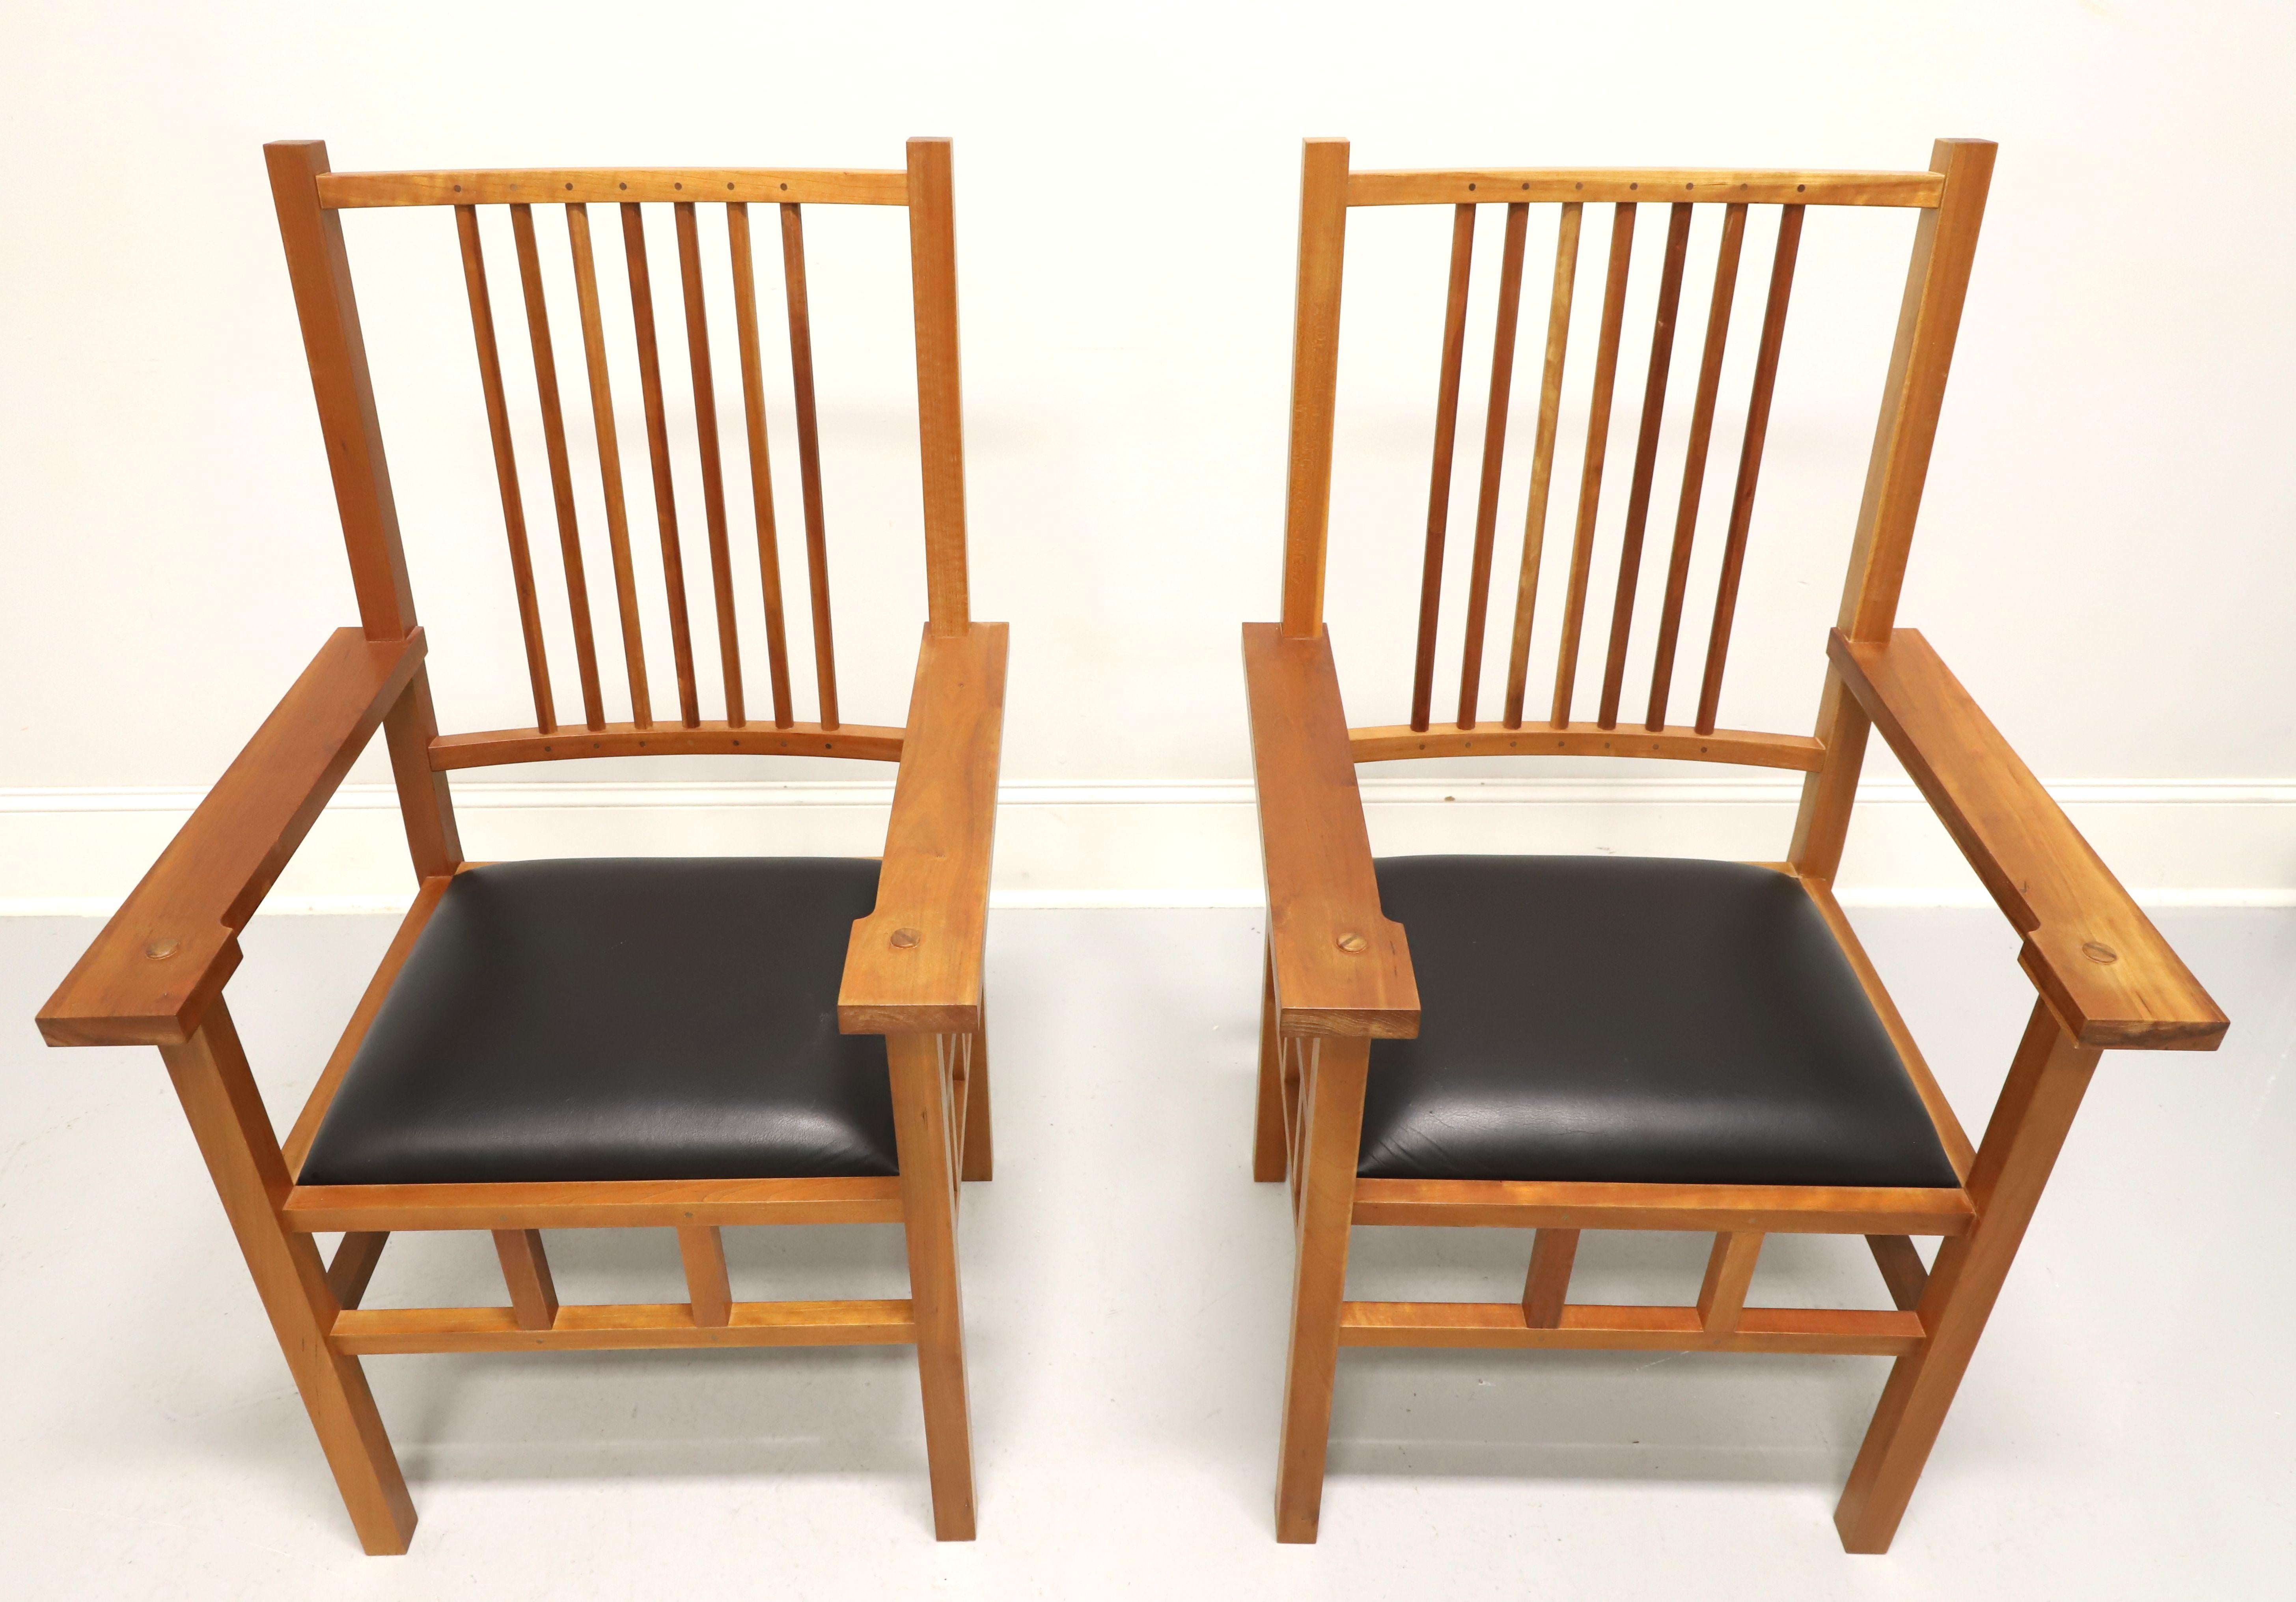 A pair of Mission / Arts & Crafts style armchairs by John Kelly Furniture, the J-02B Spindle Armchair, from their J1 Series. Solid black cherry with black walnut peg detailing to the crest rail & lower rail at the spindle joints, spindle backs,